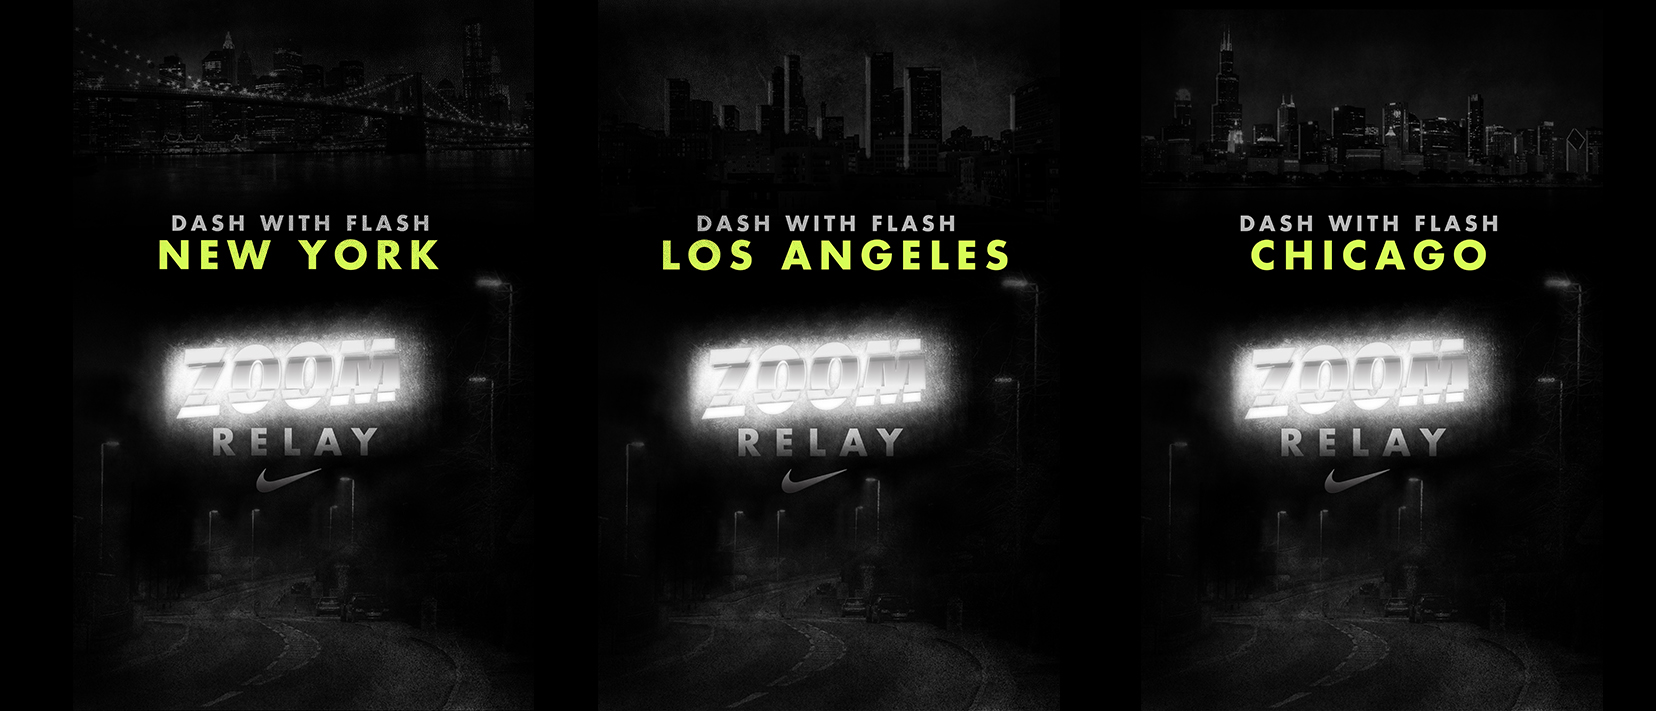 Patrick Hardy Design - Nike Zoom Relay Poster Concepts